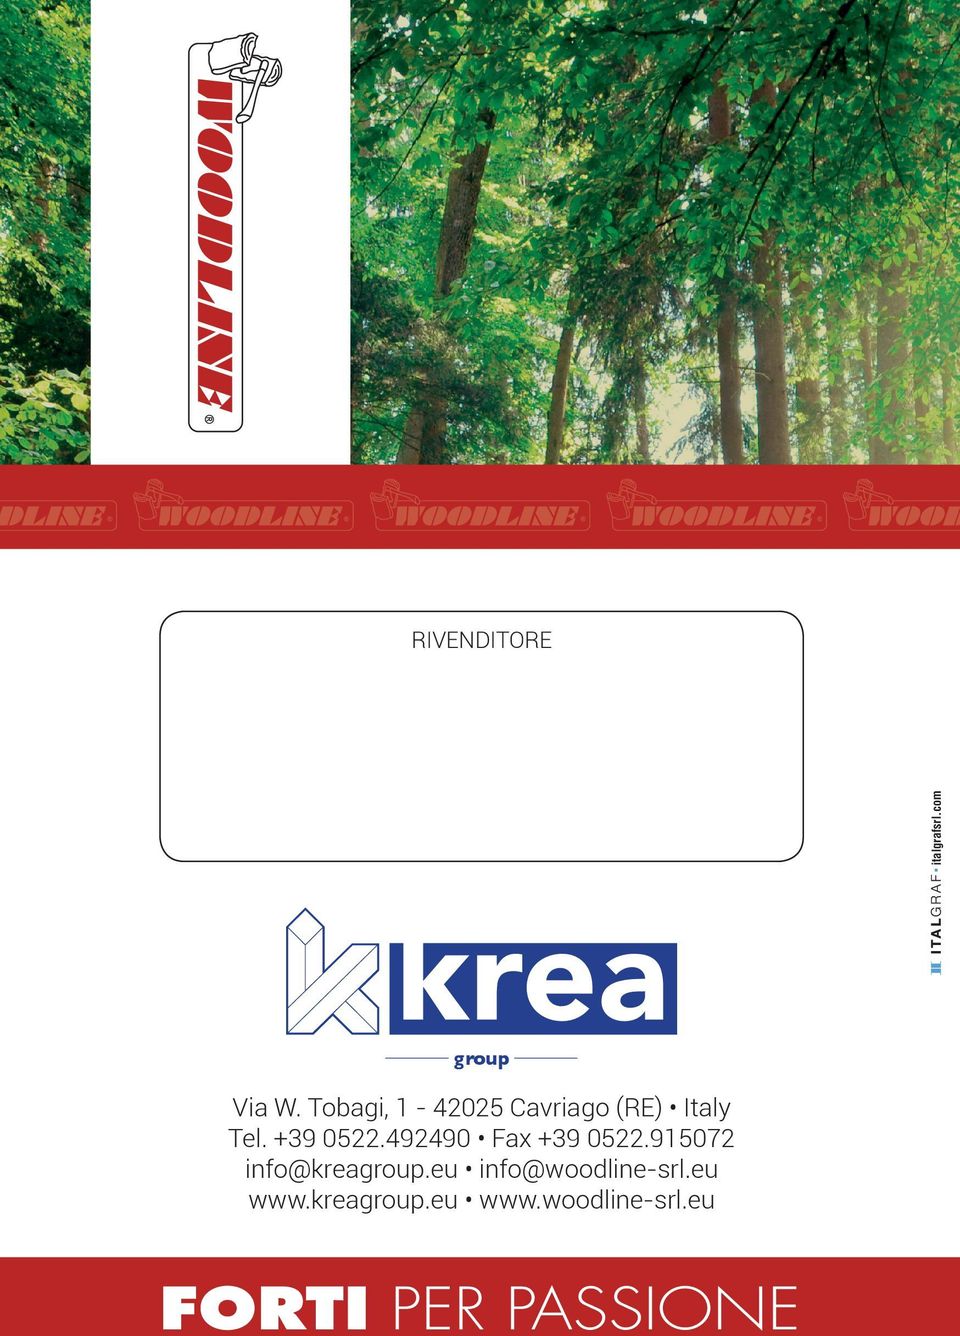 492490 Fax +39 0522.915072 info@kreagroup.